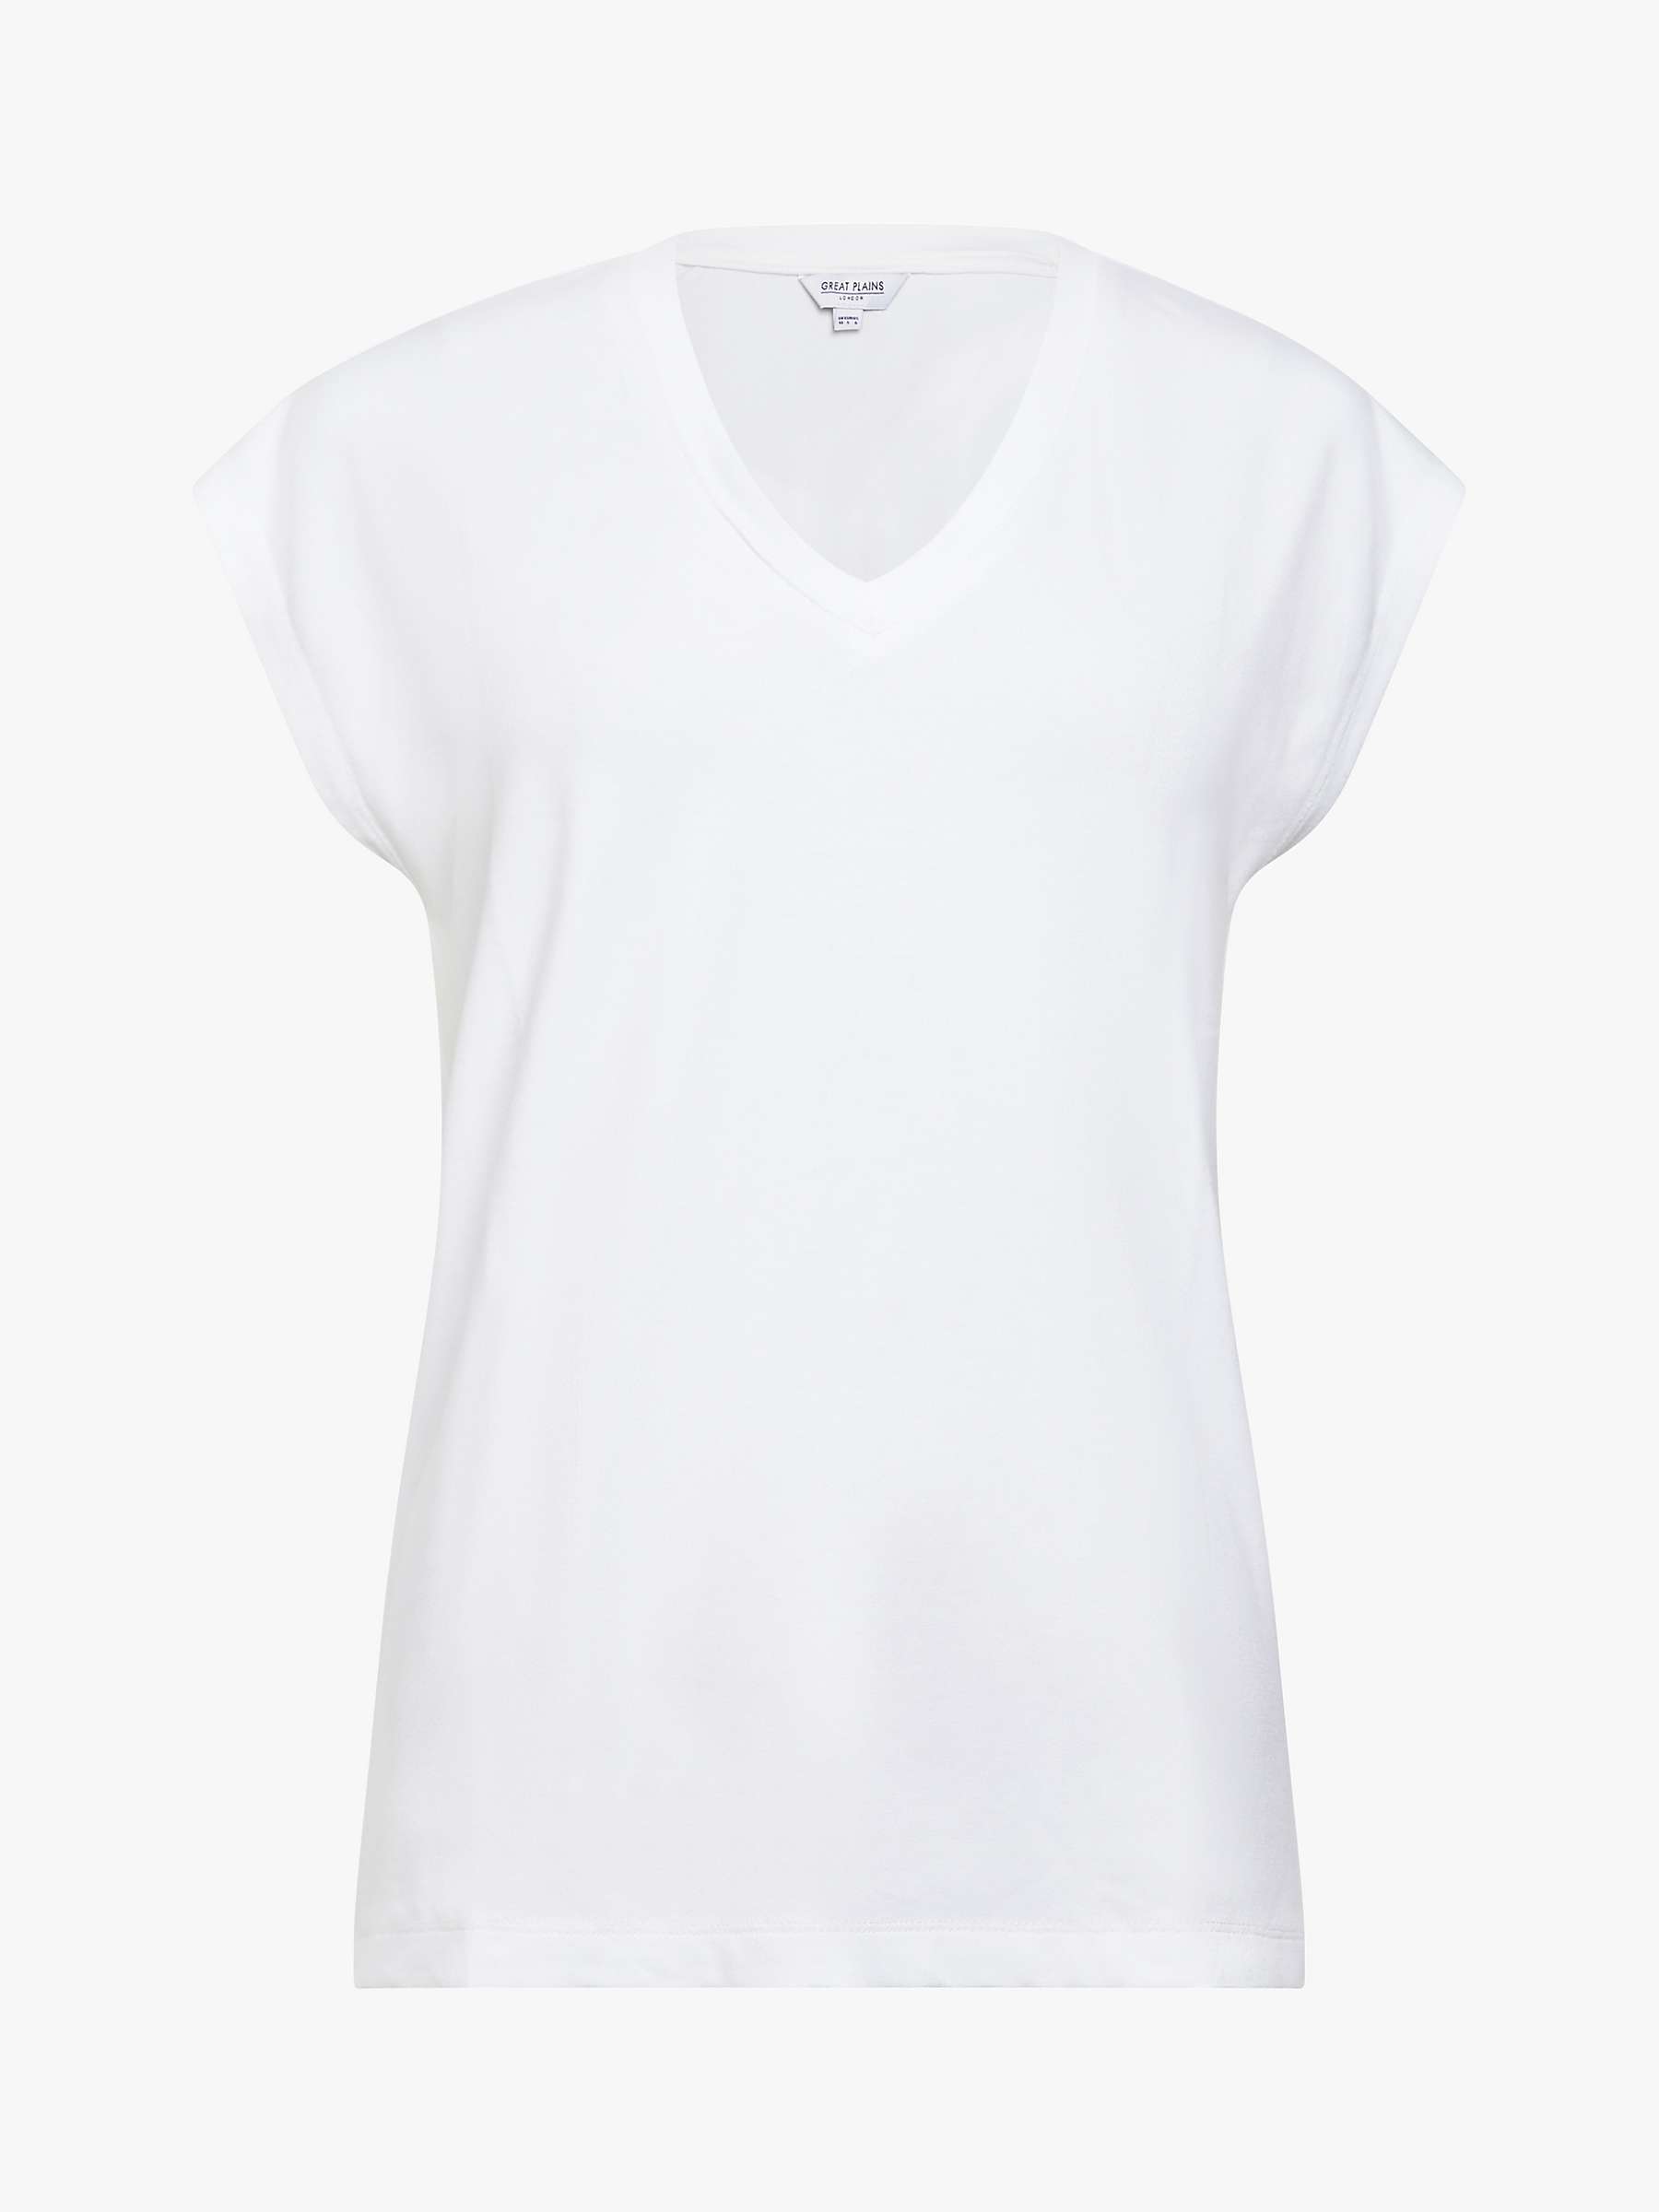 Buy Great Plains Core Soft Touch T-Shirt Online at johnlewis.com